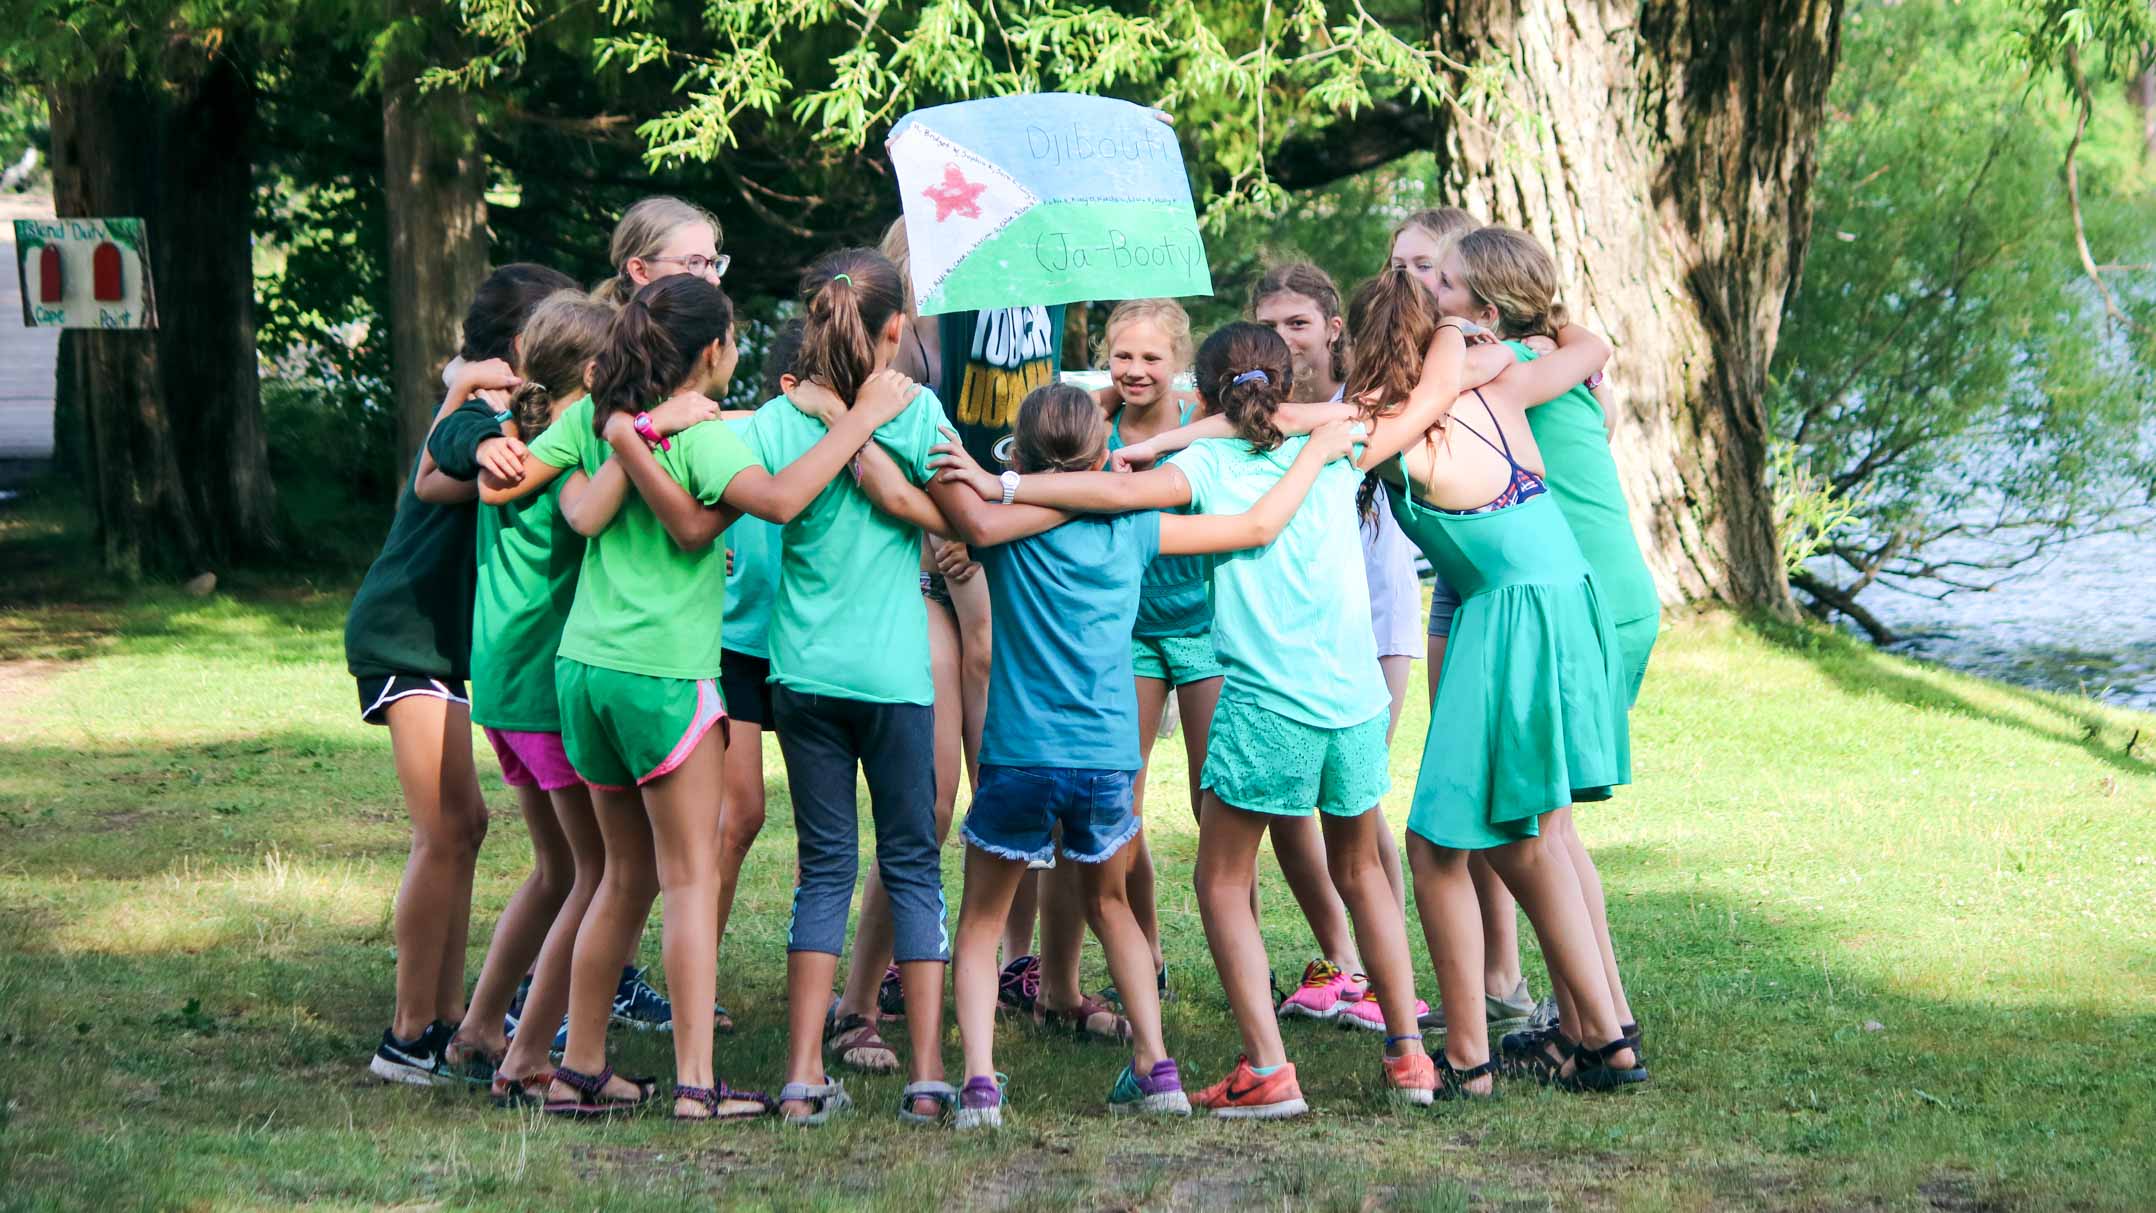 Group of campers circles up, holding camp Olympics Djibouti sign